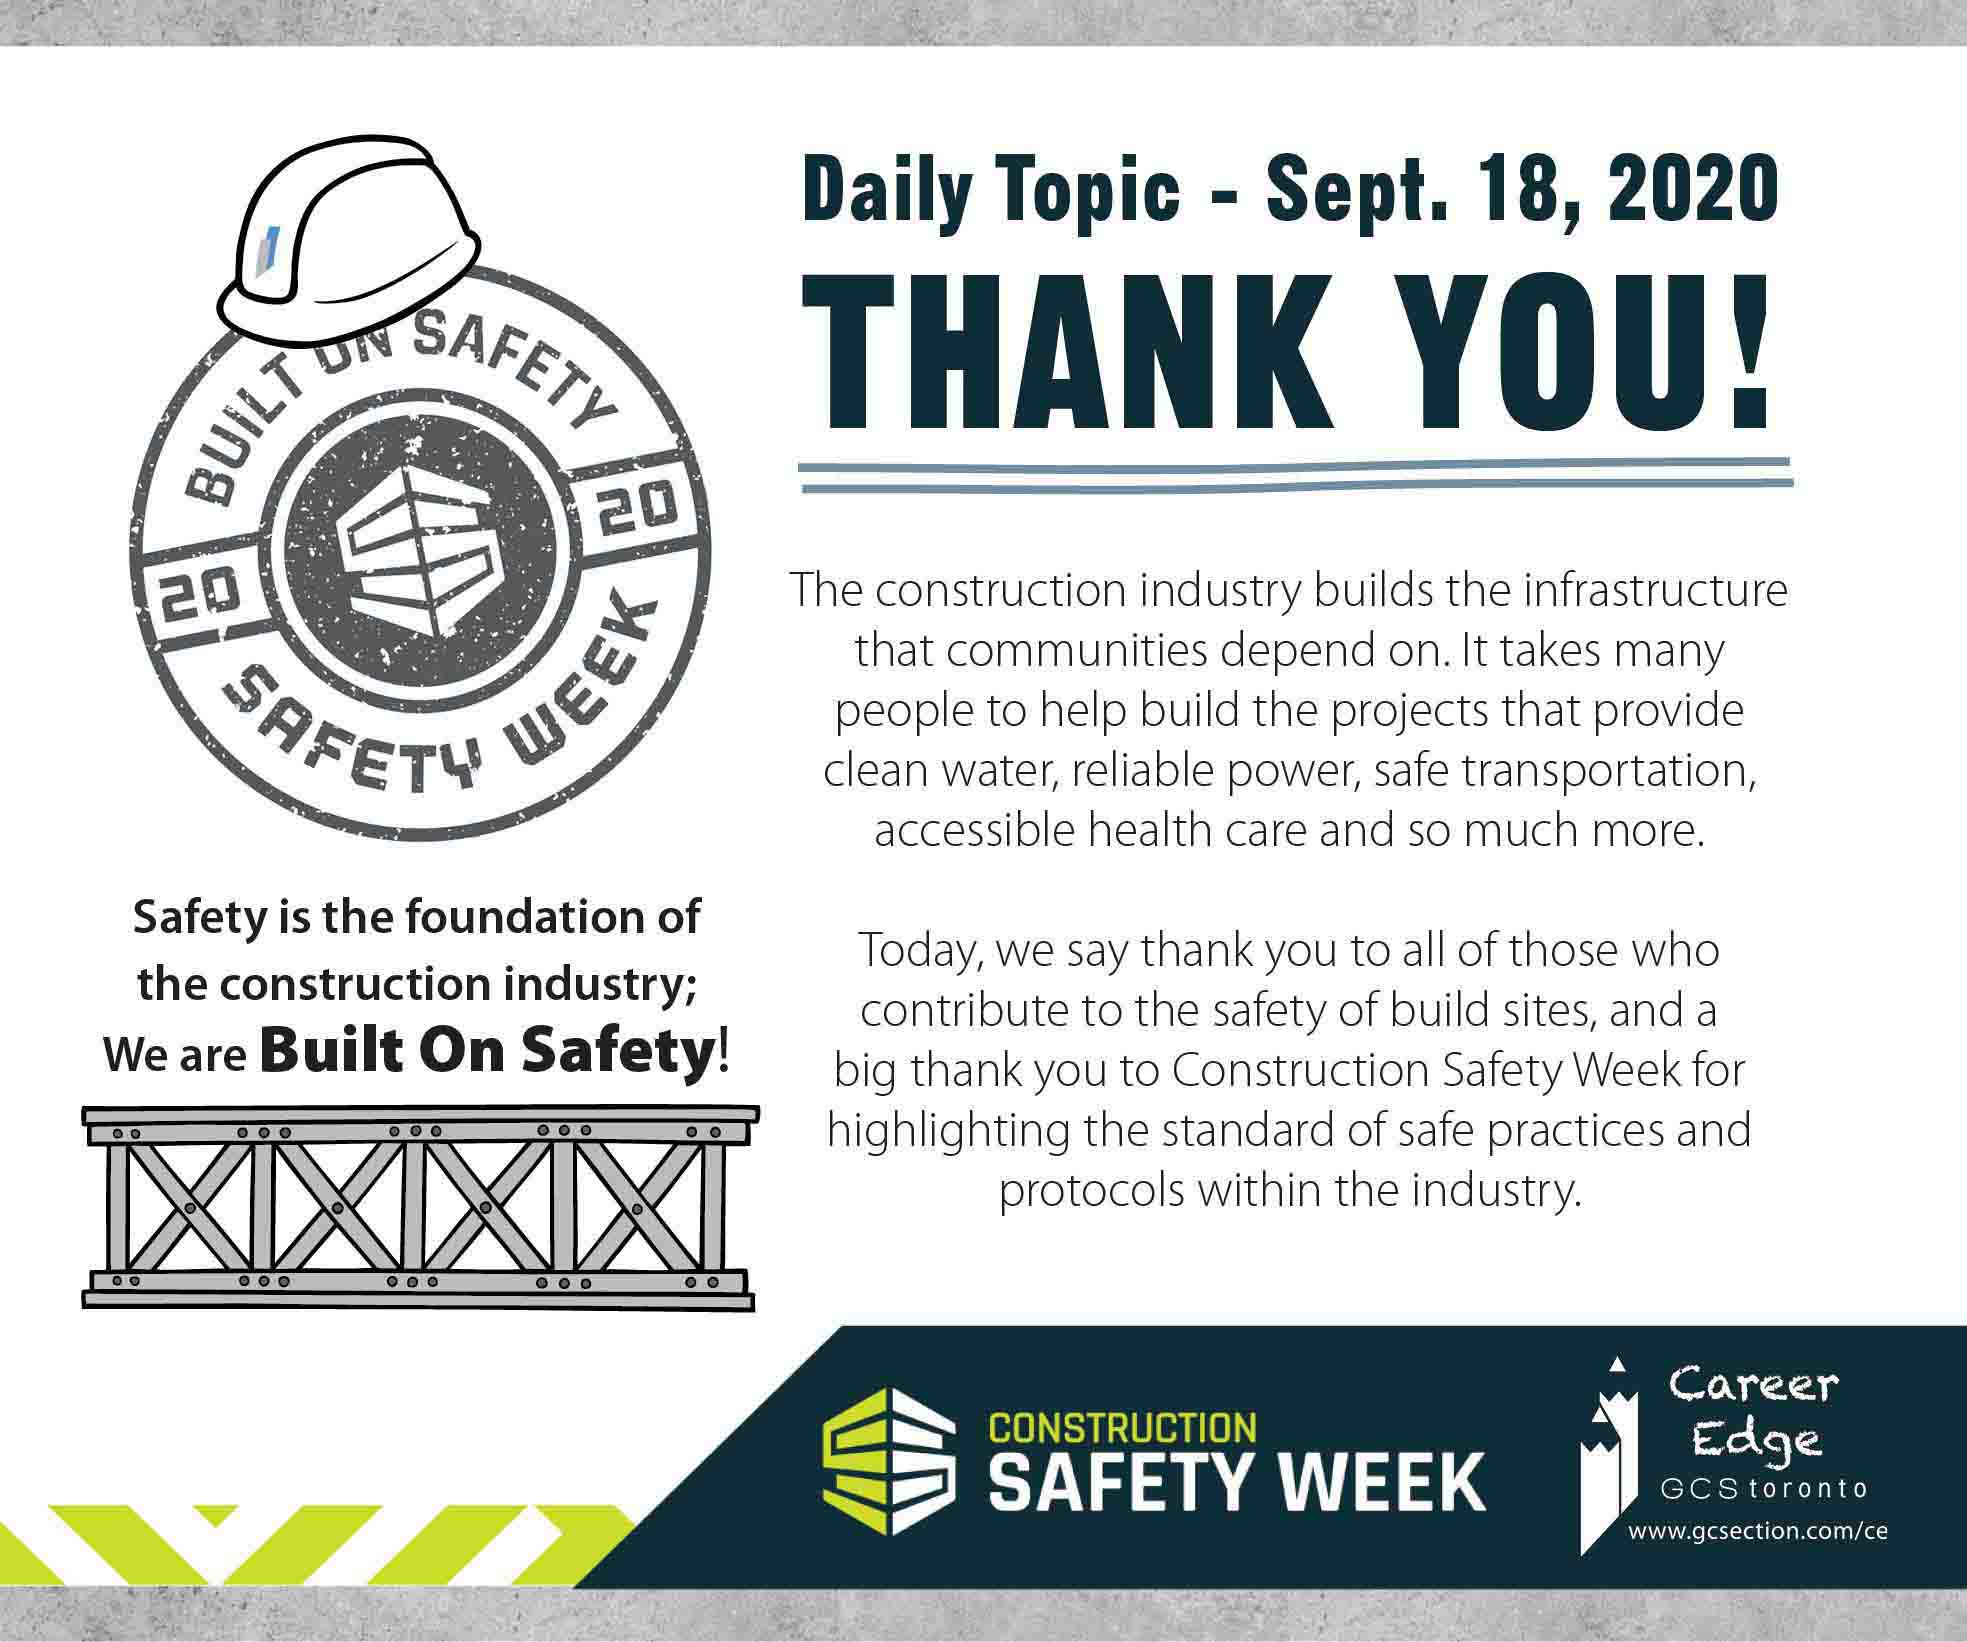 Construction-Safety-Week-daily-post-5-2